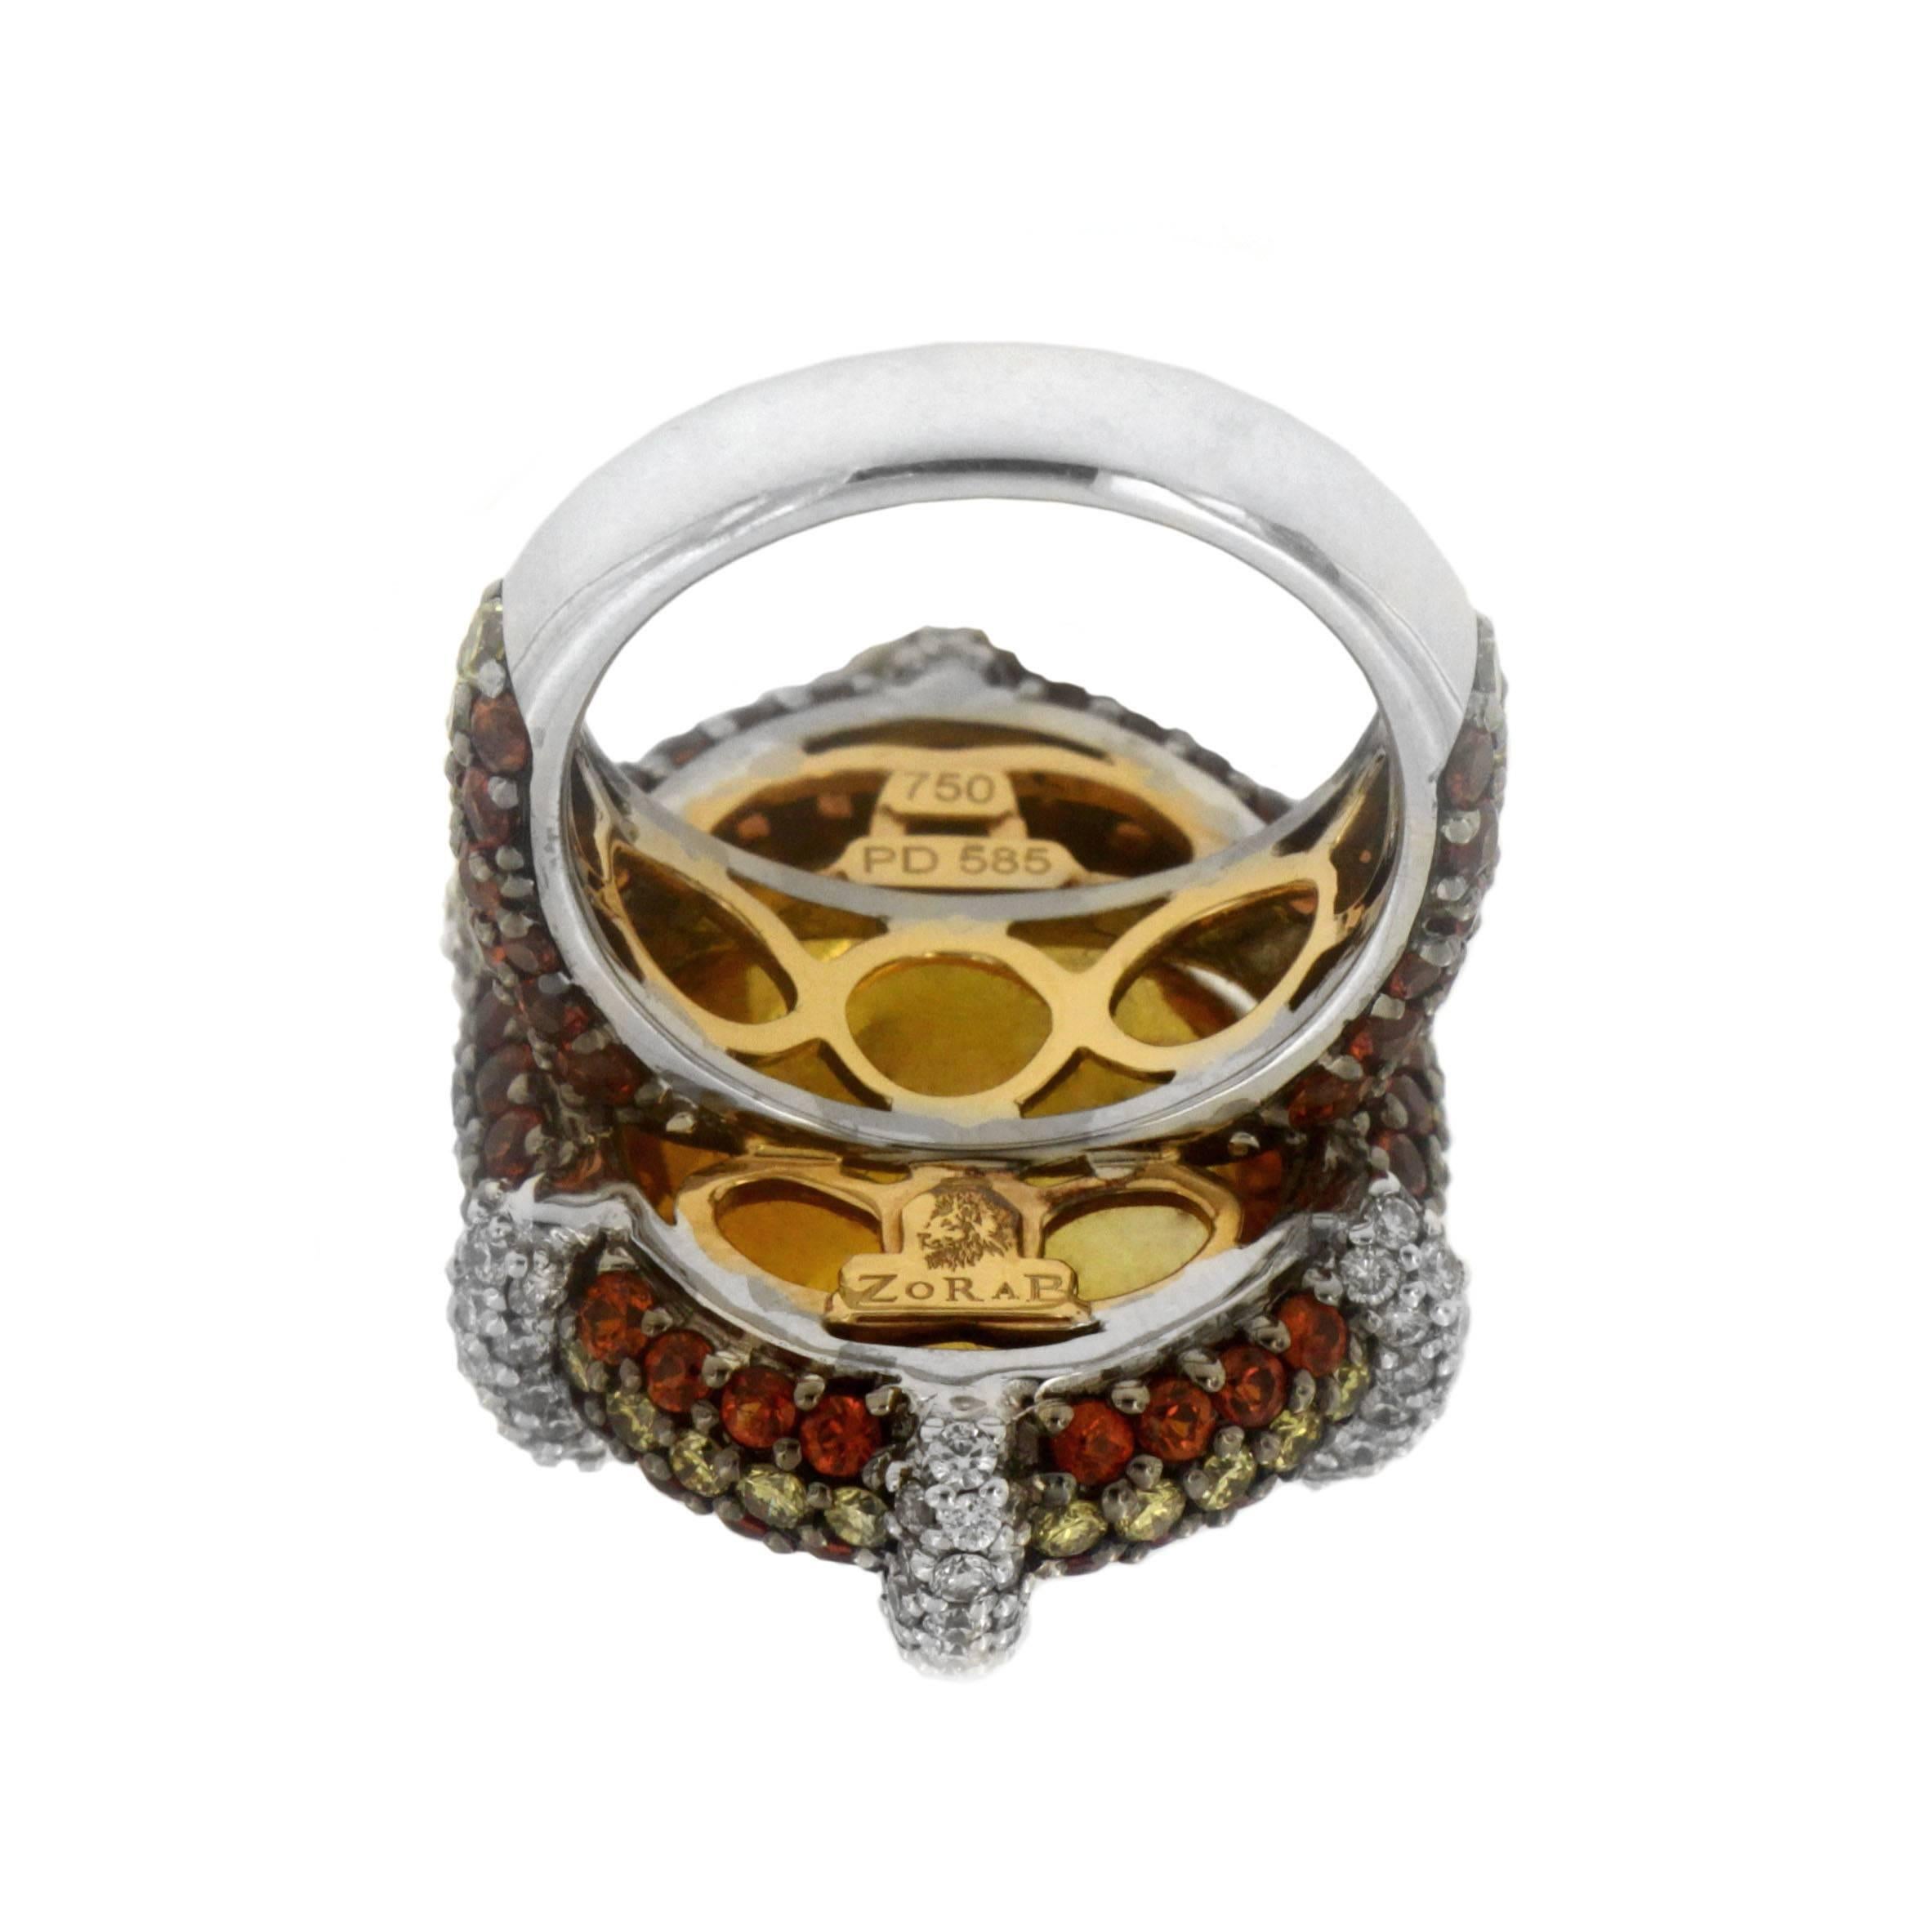 Zorab Creation  21.19 Carat Citrine Diamond Sapphire Dome Cocktail Gold Ring In New Condition For Sale In San Diego, CA